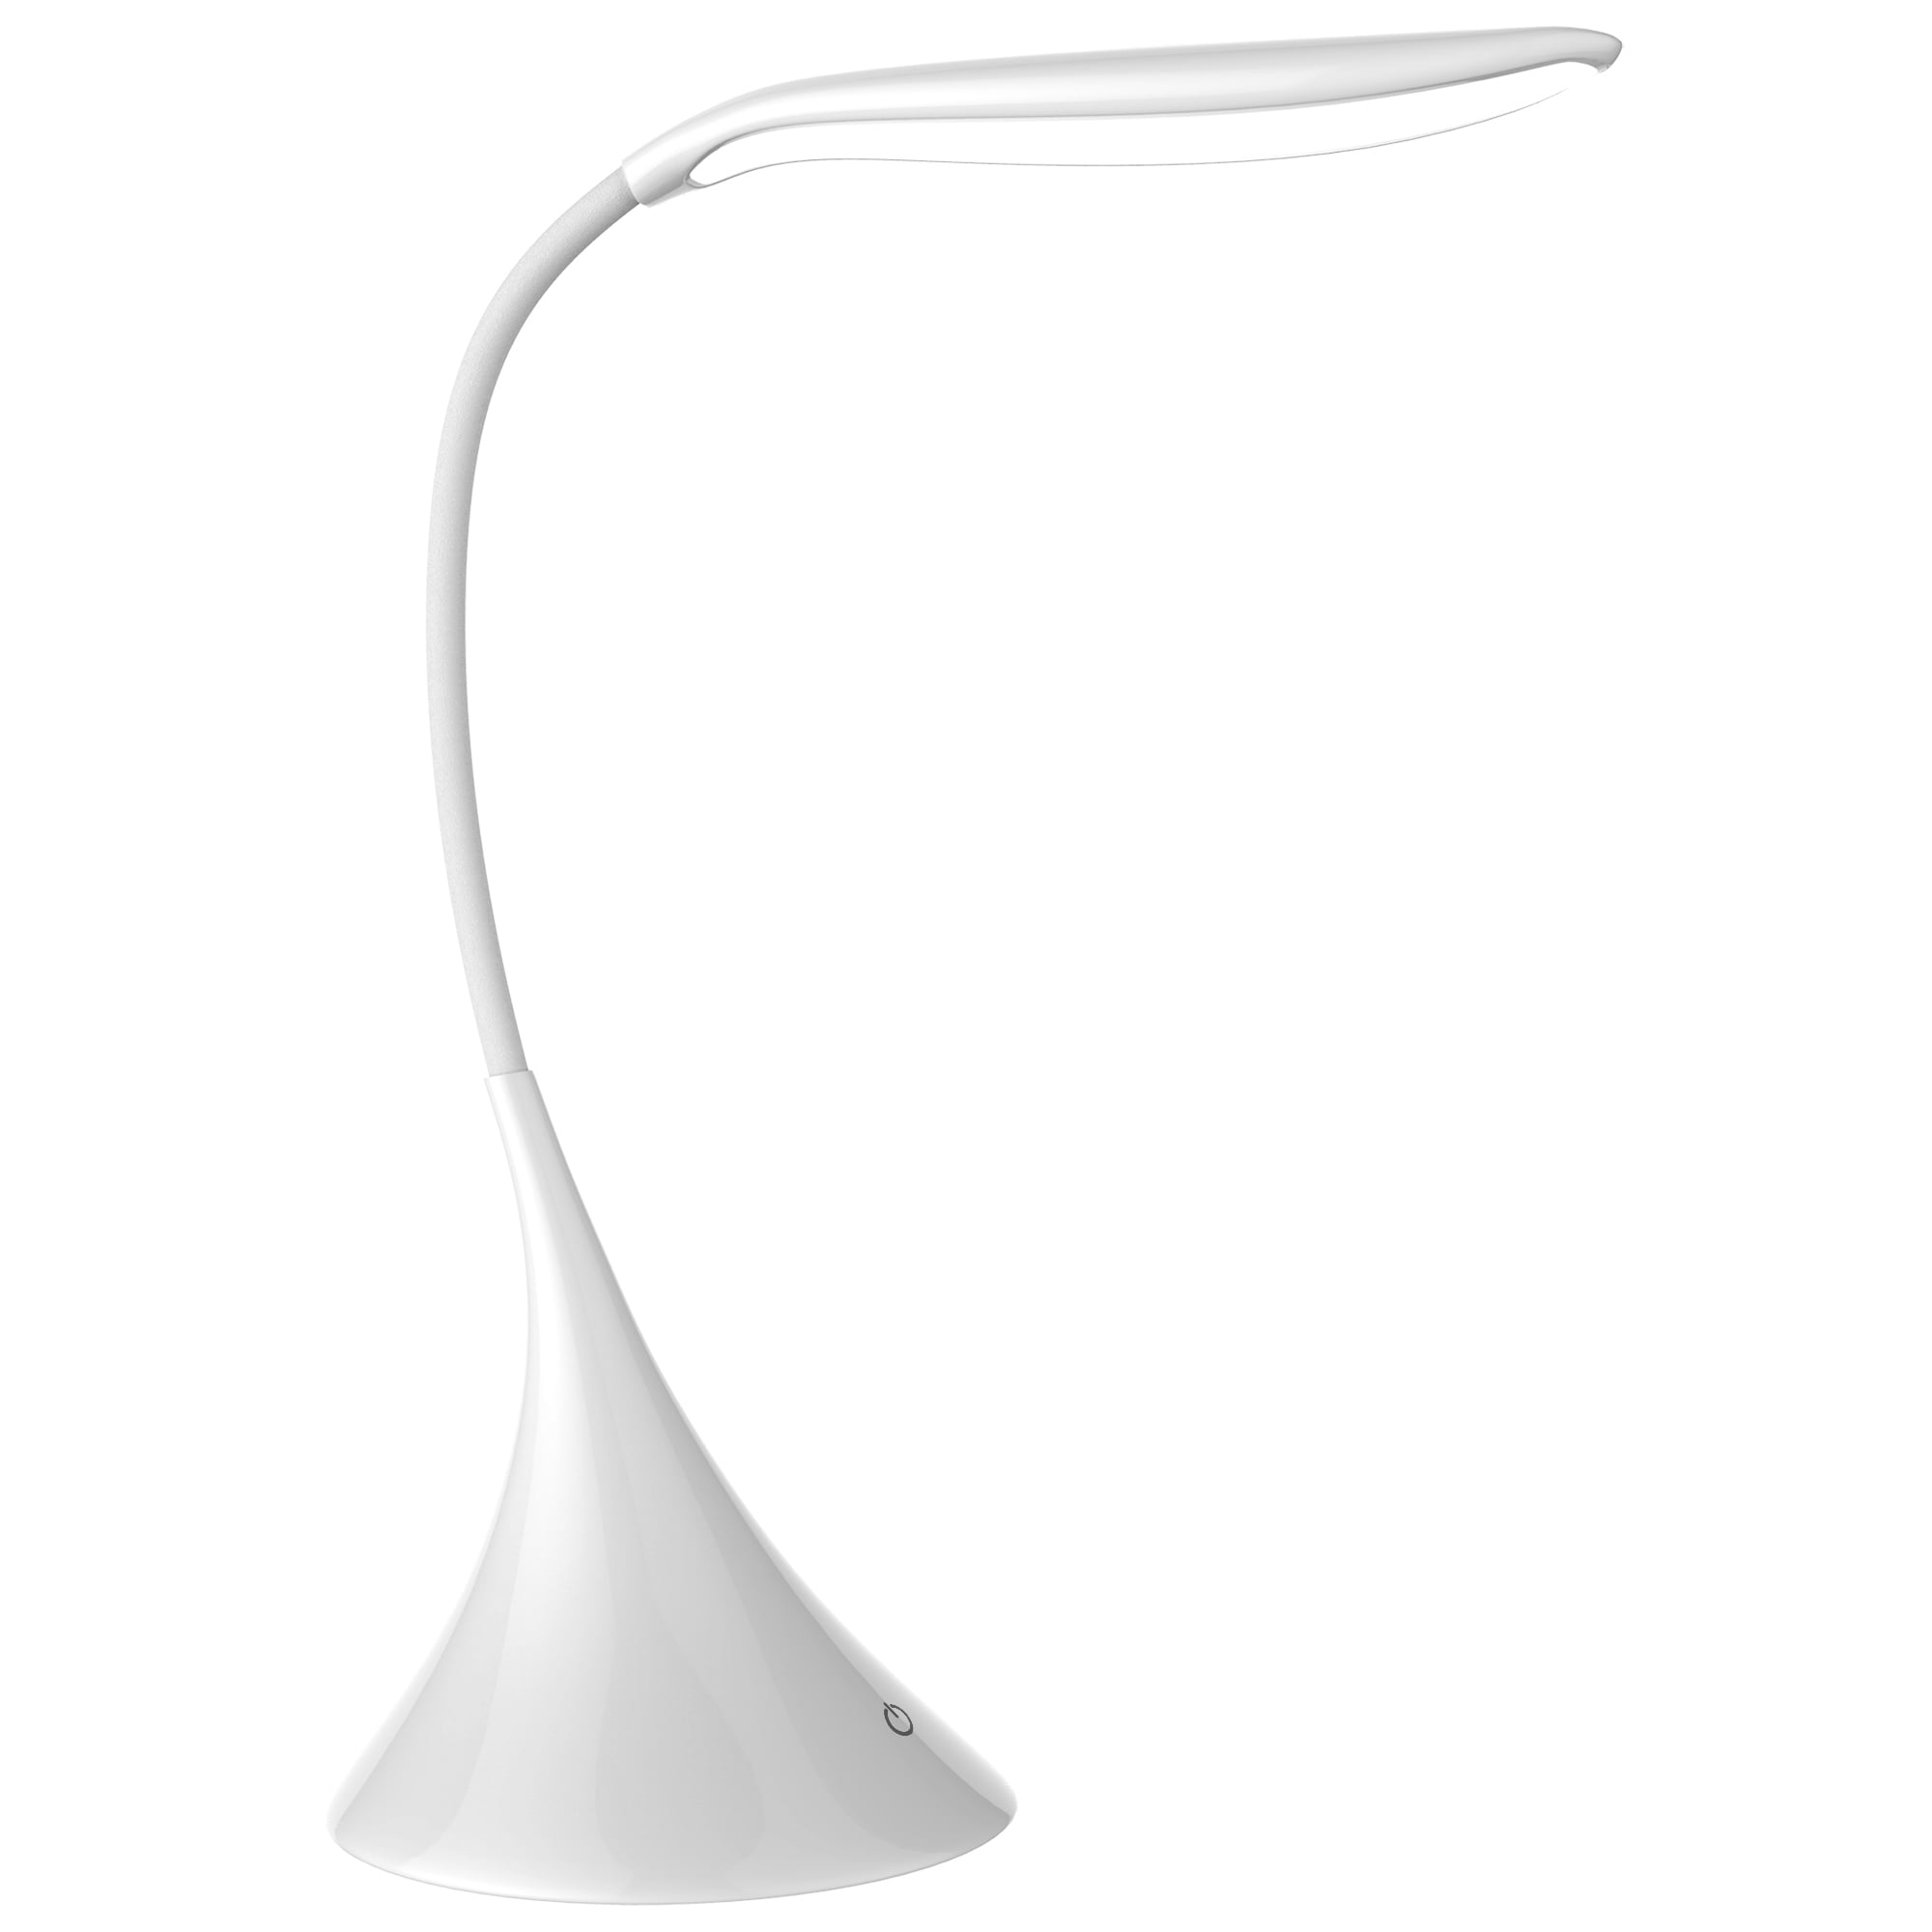 Touch Sensor Lamp- Dimmable, Battery Operated LED Light with Adjustable